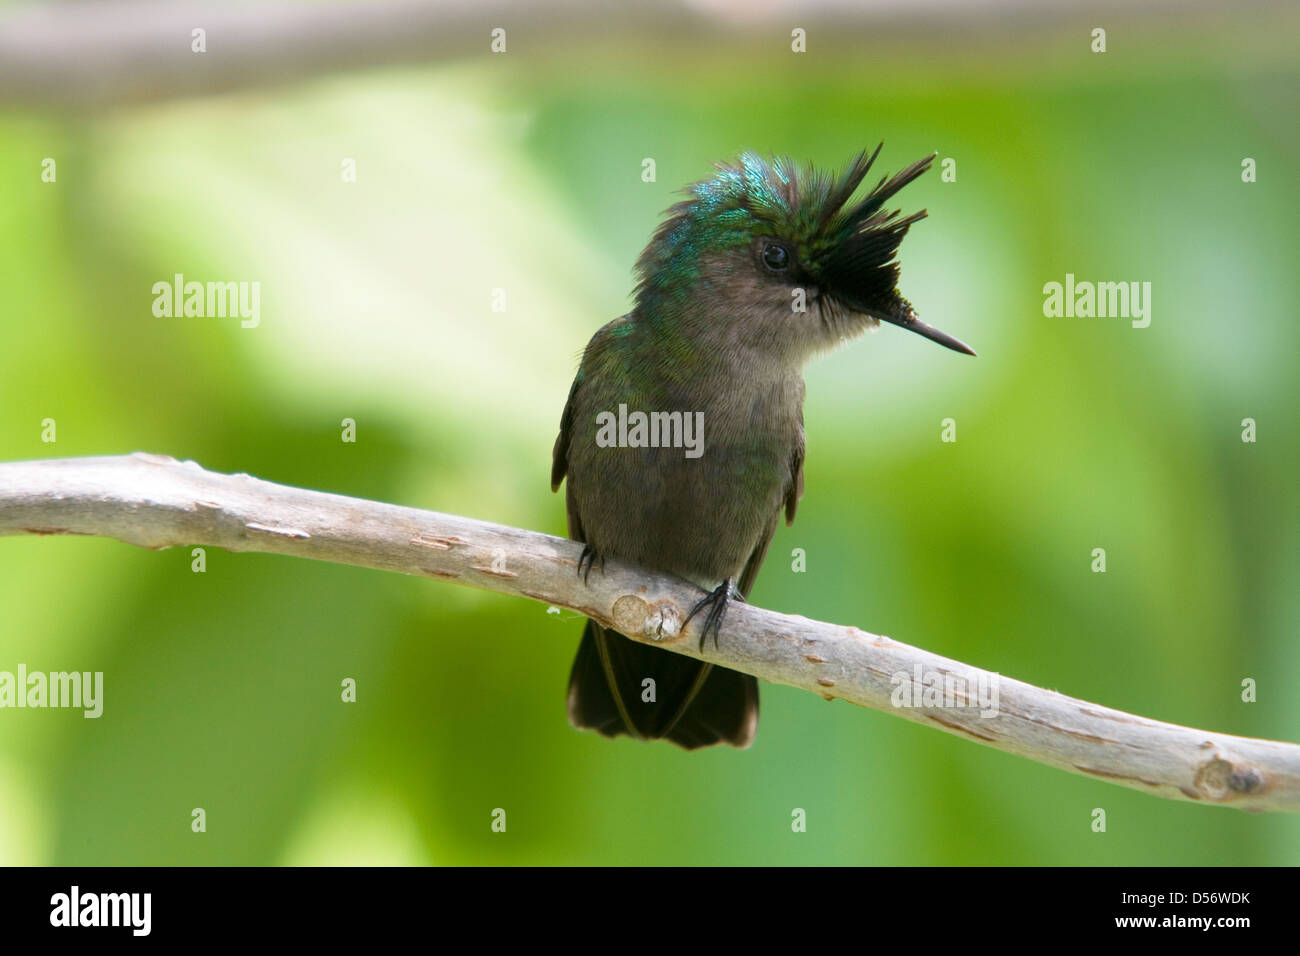 Thront Antillean Crested Kolibri - Looking at You. Stockfoto